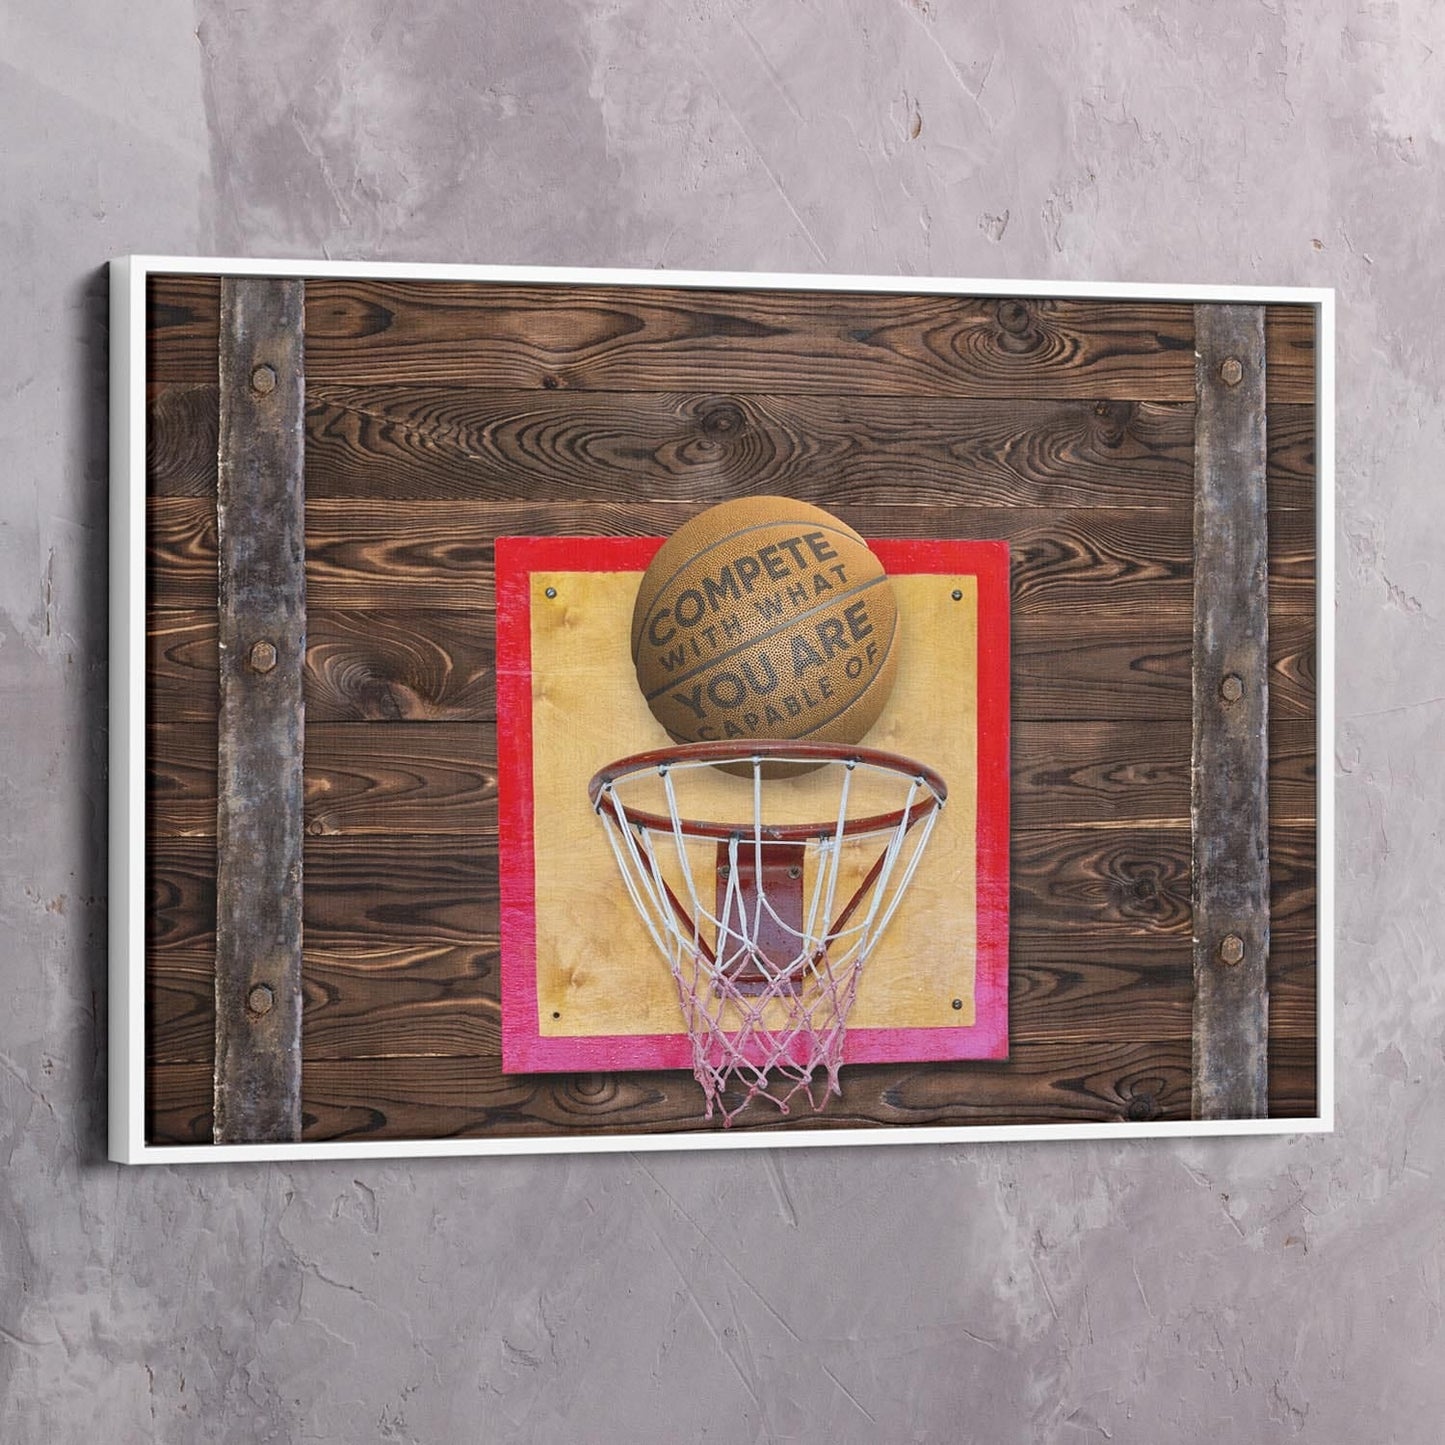 Compete with What You are Capable of - Michael Jordan Inspired Art Wall Art | Inspirational Wall Art Motivational Wall Art Quotes Office Art | ImpaktMaker Exclusive Canvas Art Landscape